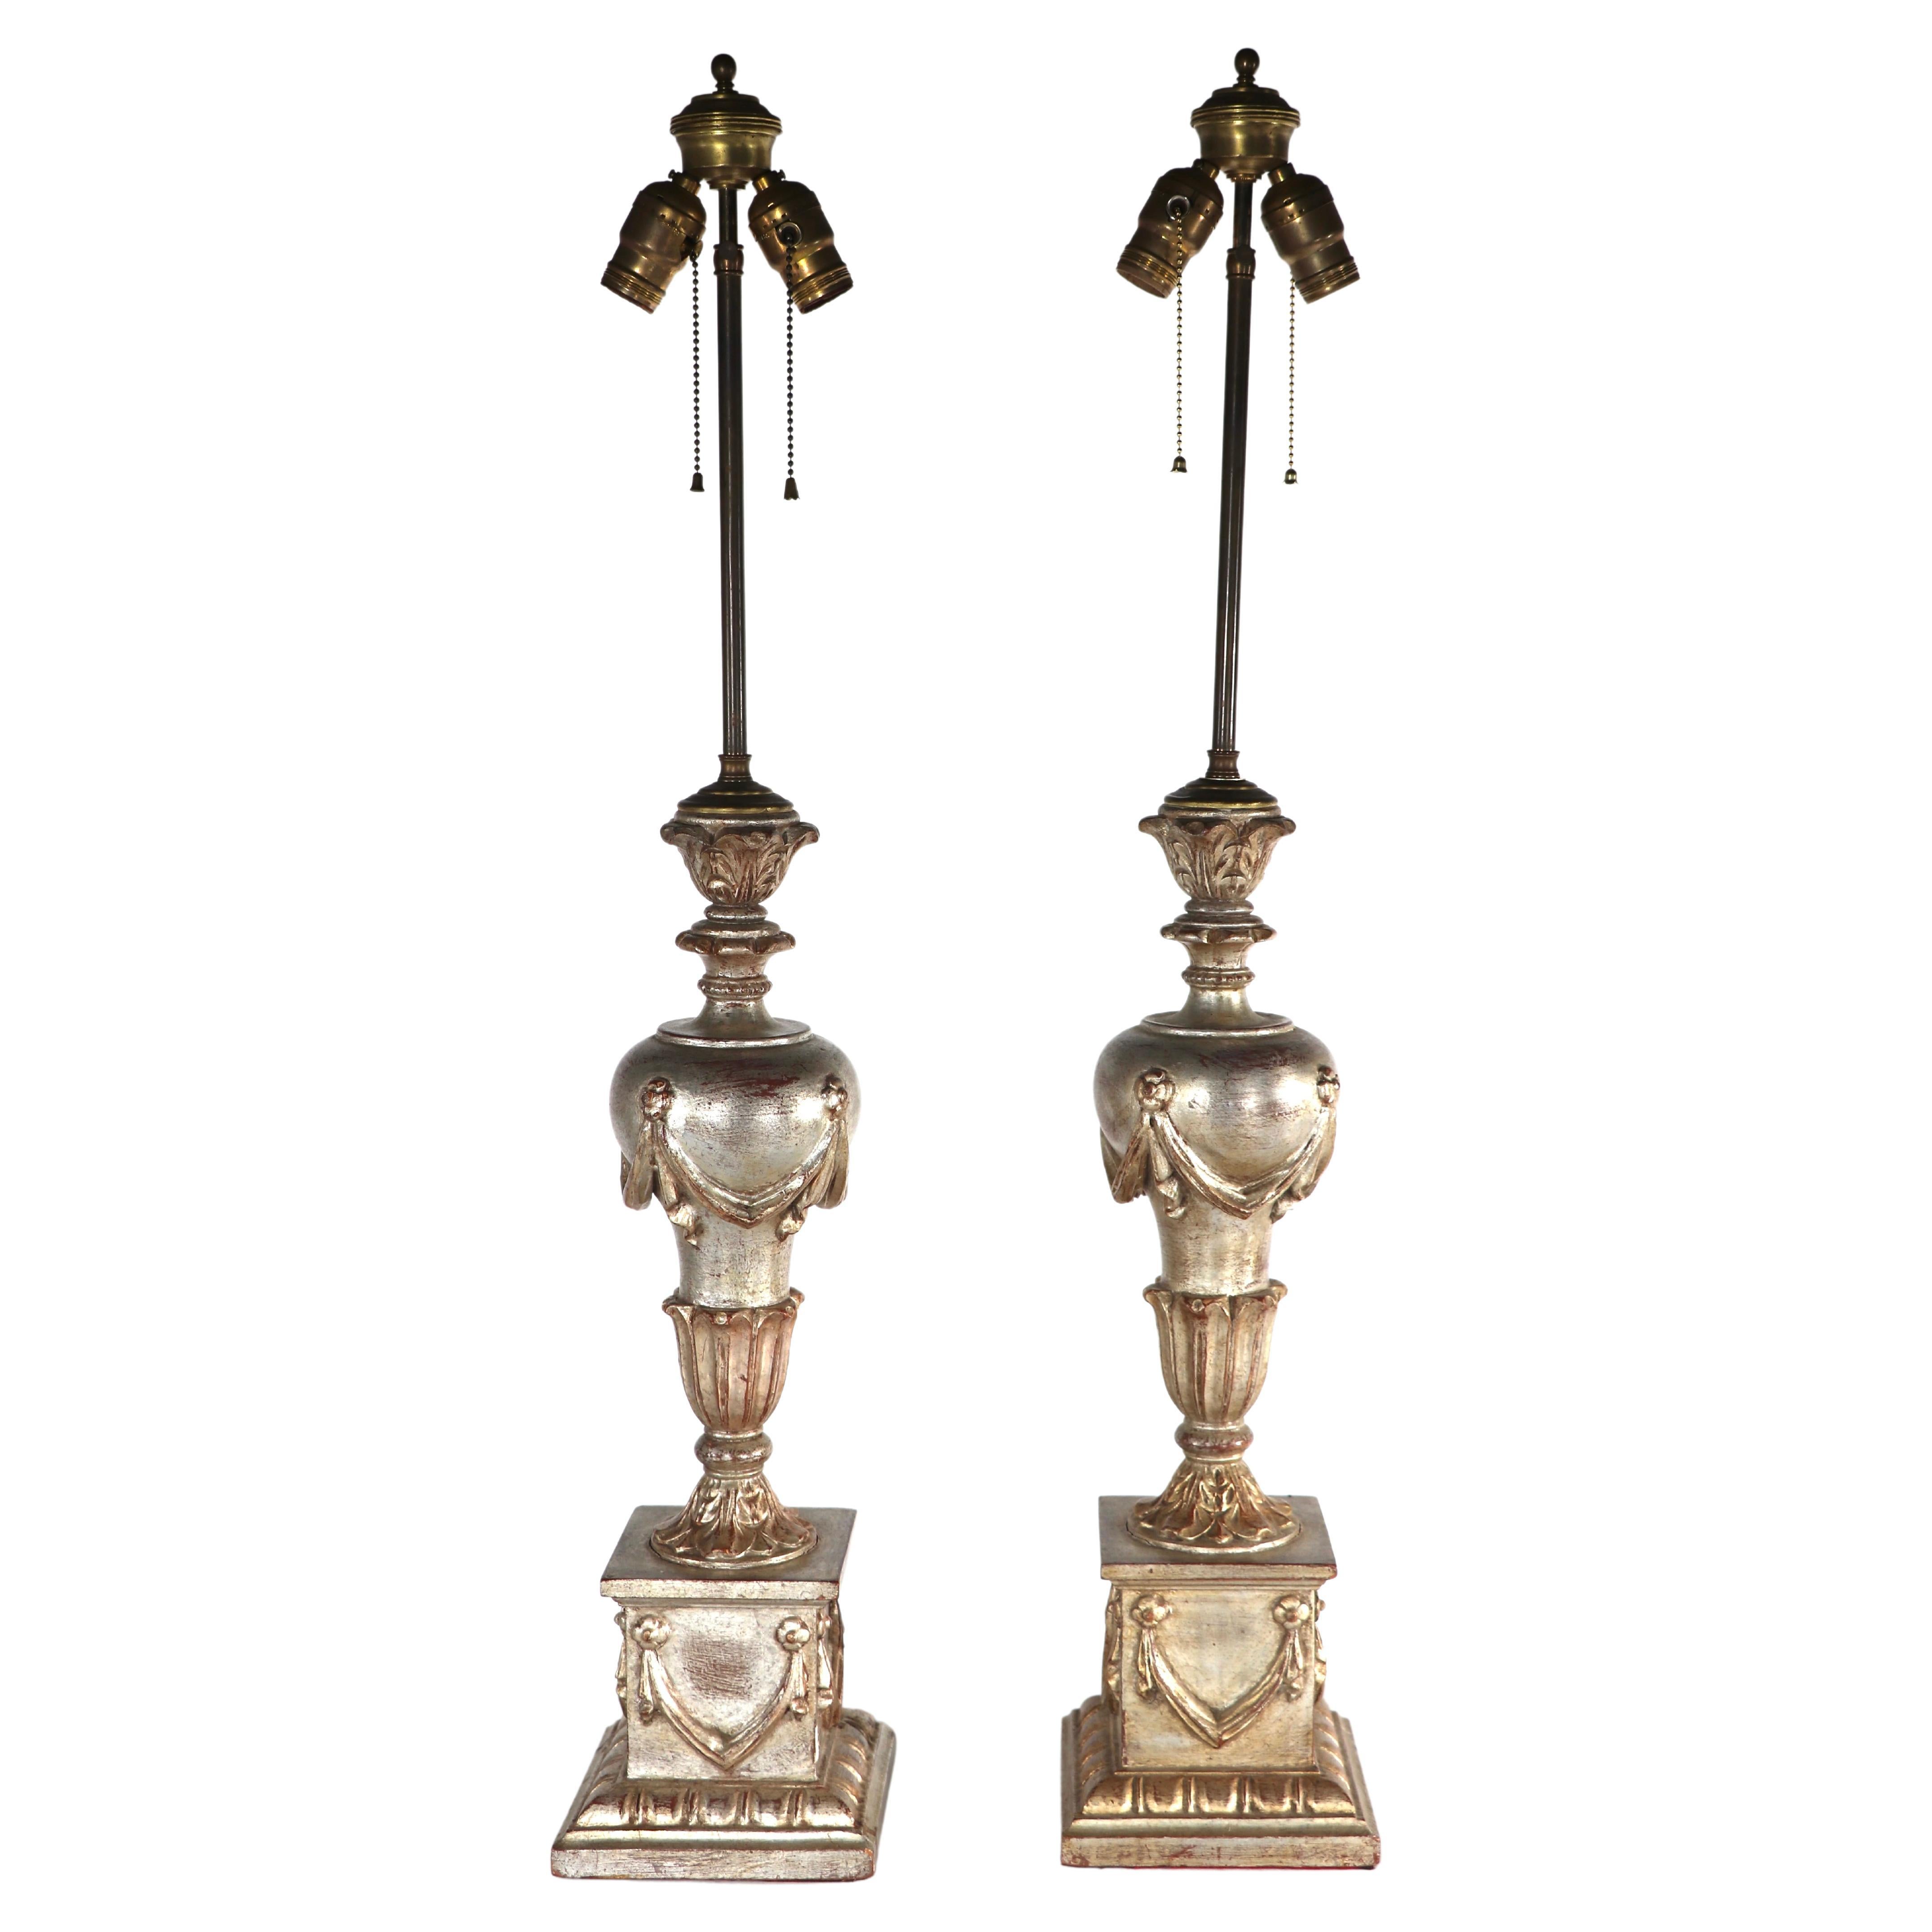 Pr. Classical Style Silver Gilt Table Lamps Att. to Palladio